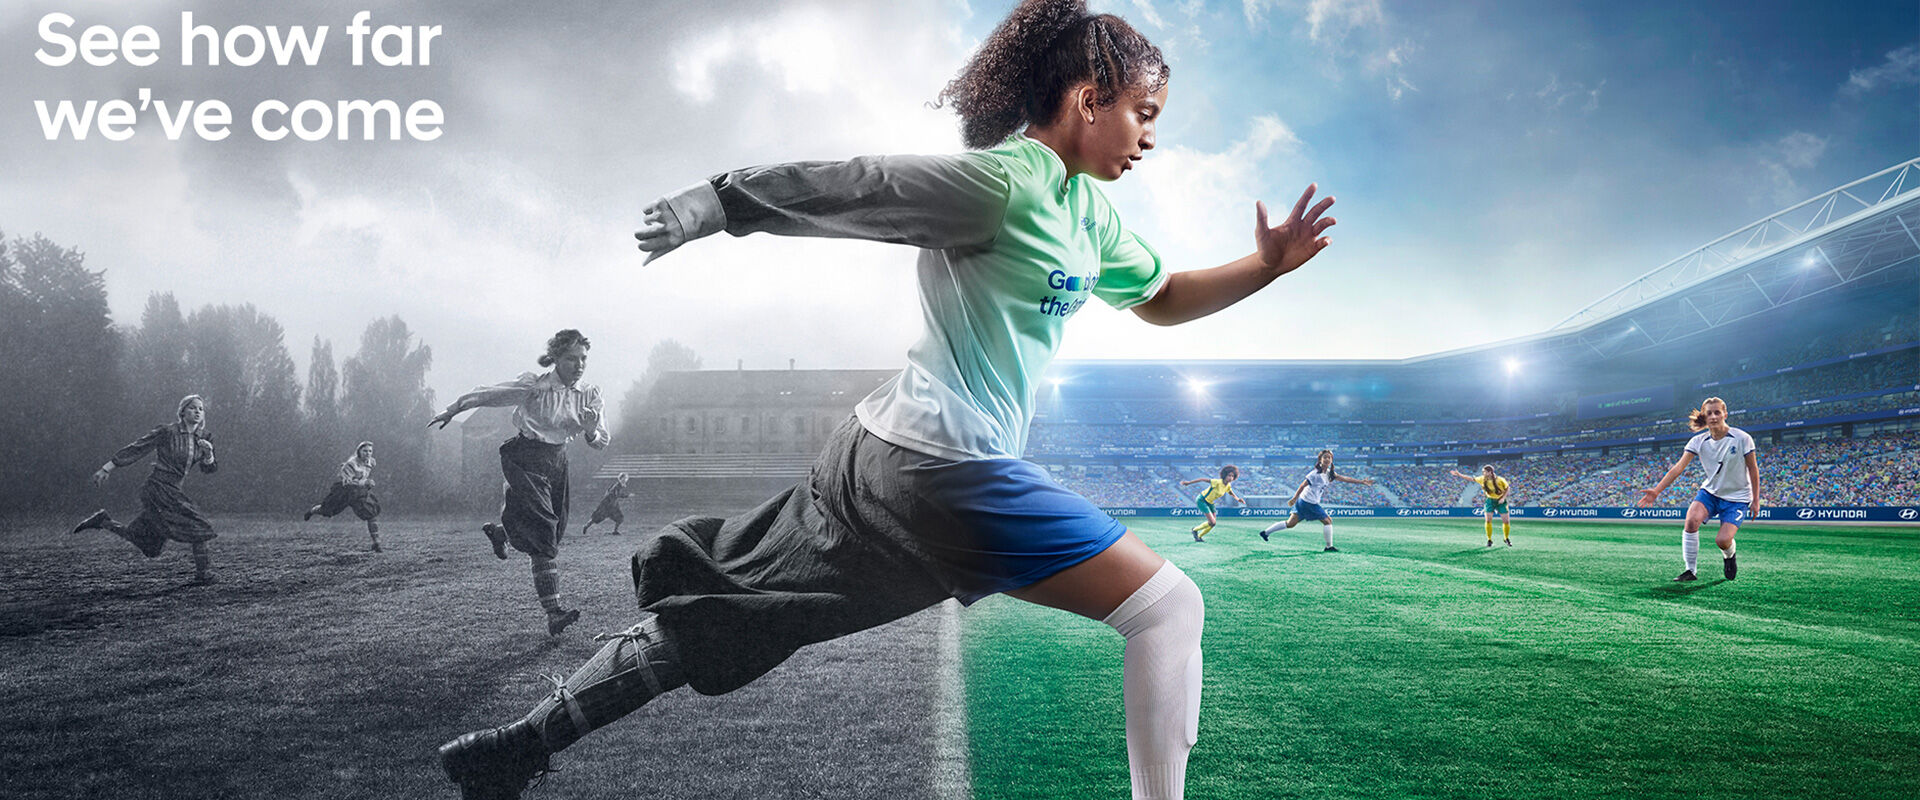 Hyundai Motor Expands ‘Goal of the Century’ Campaign to Focus on Inclusivity for FIFA Women’s World Cup 2023™